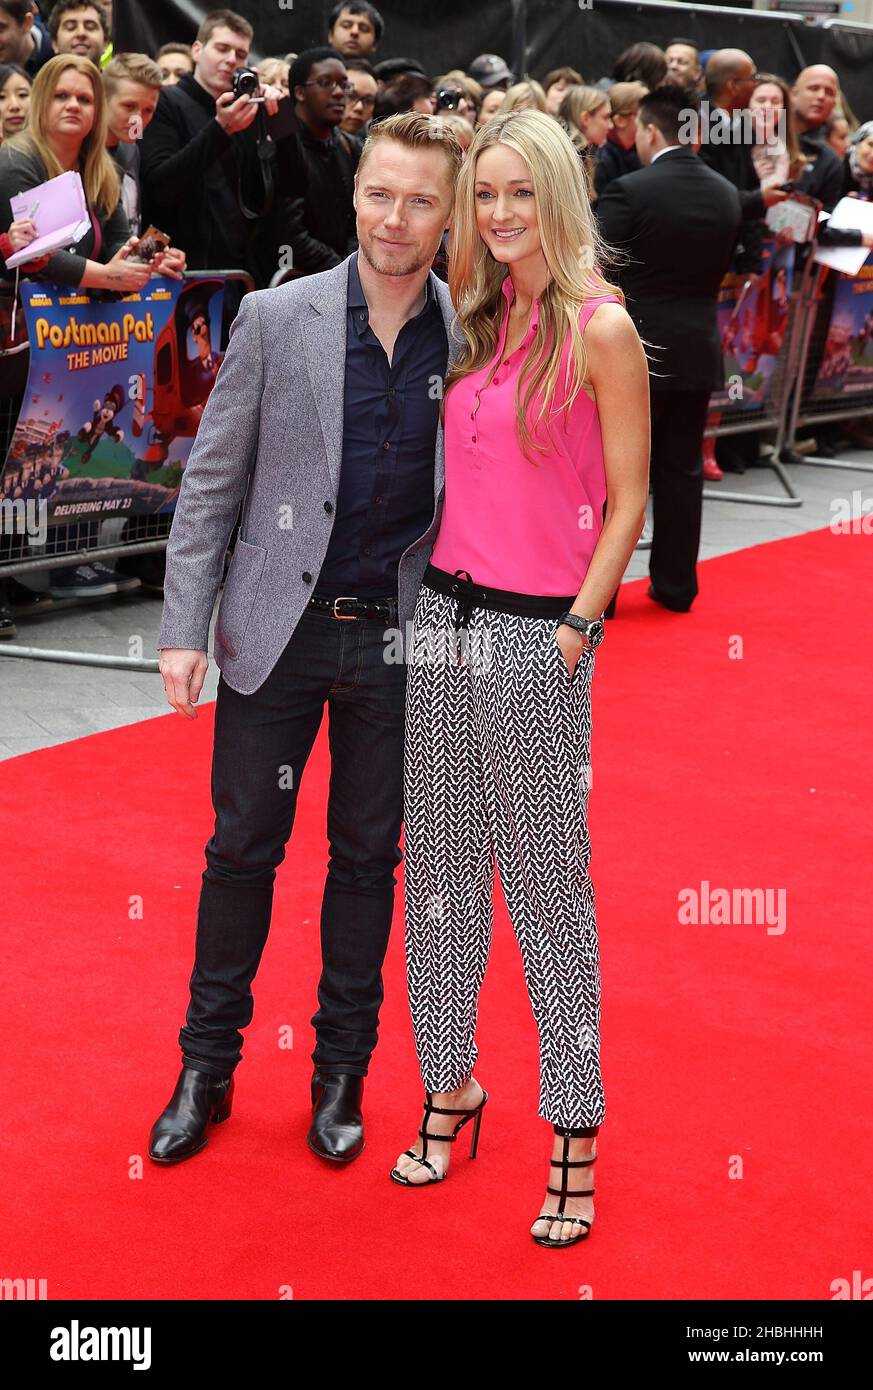 Ronan Keating and Storm Uechtritz attending Postman Pat The Movie World Premier at The West End Odeon in Leicester Square in London. Stock Photo